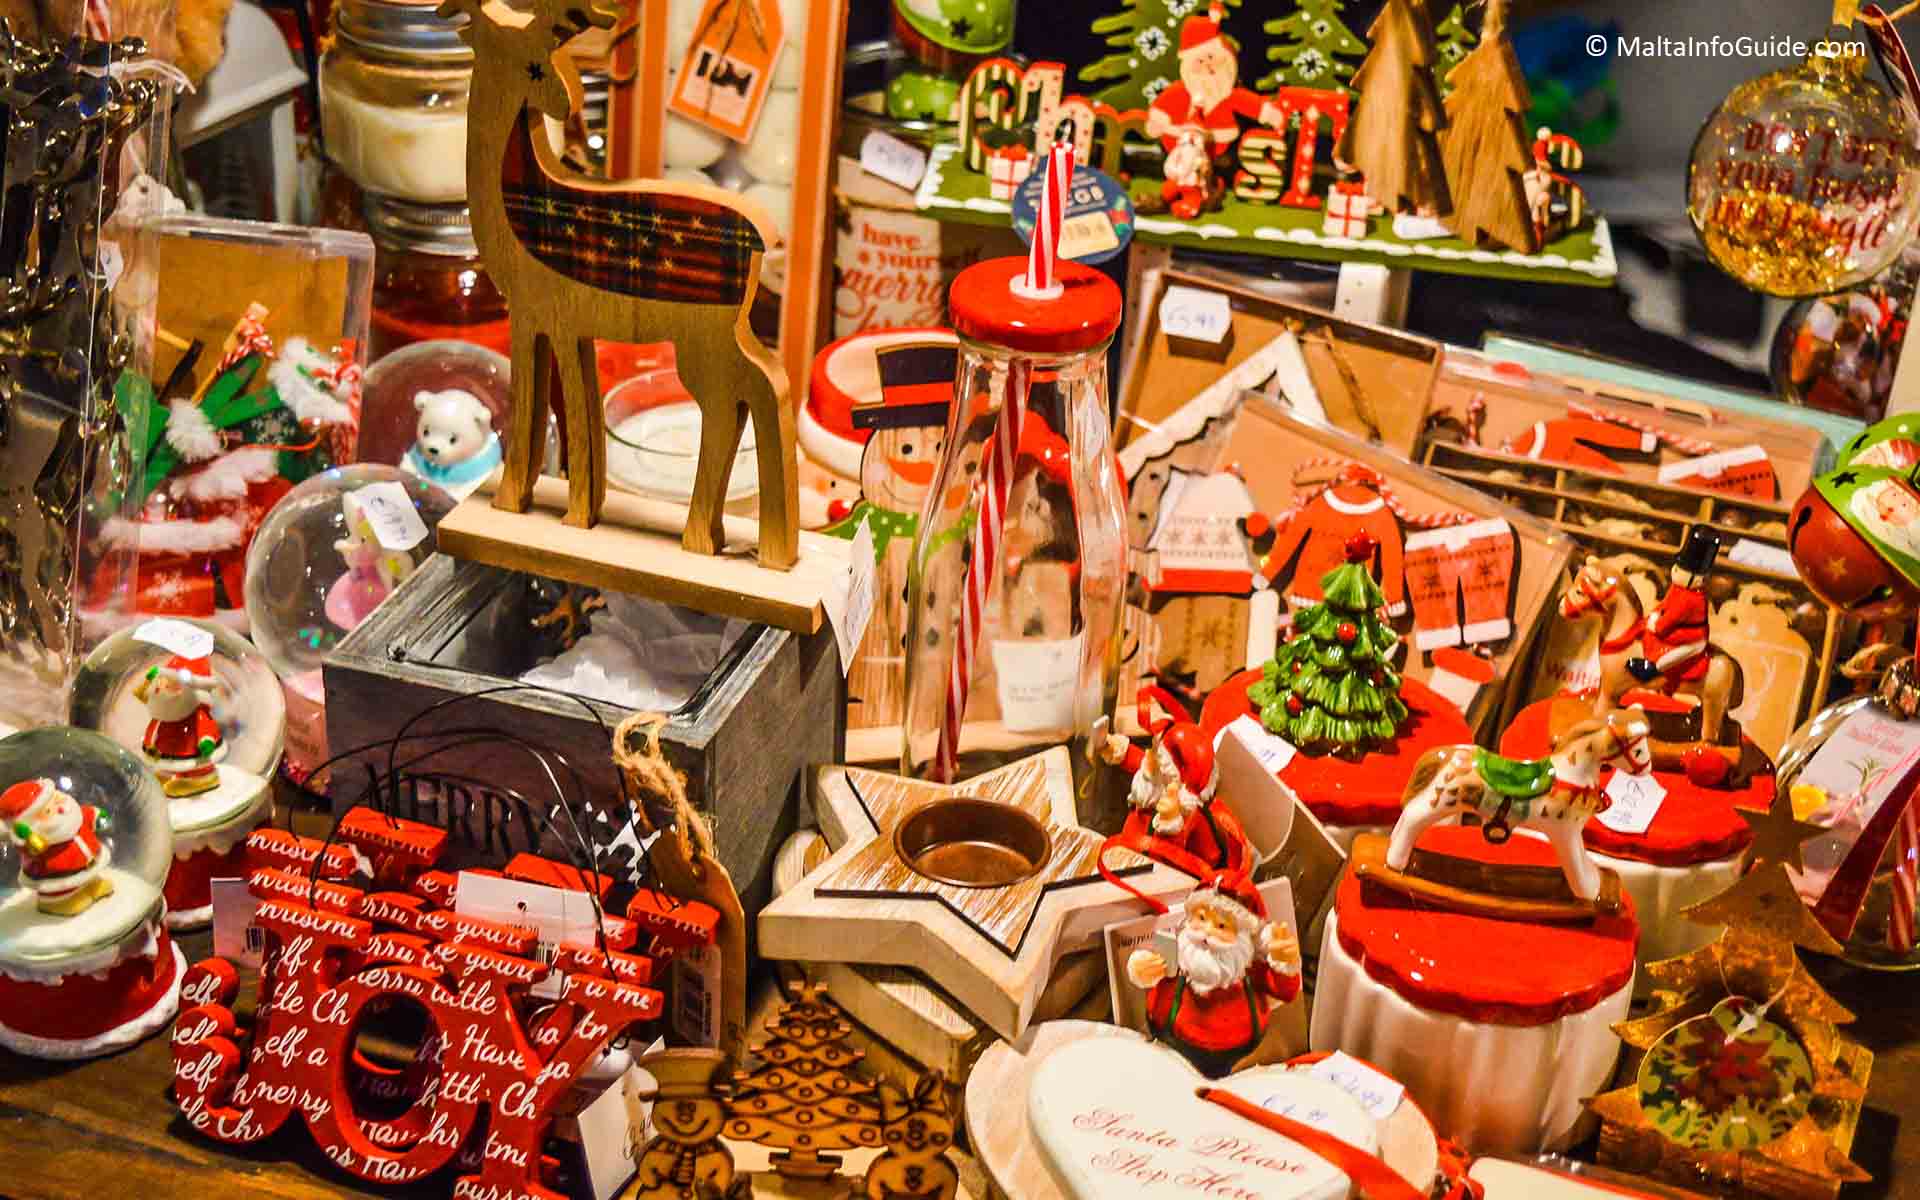 Christmas items being sold at a Christmas market.